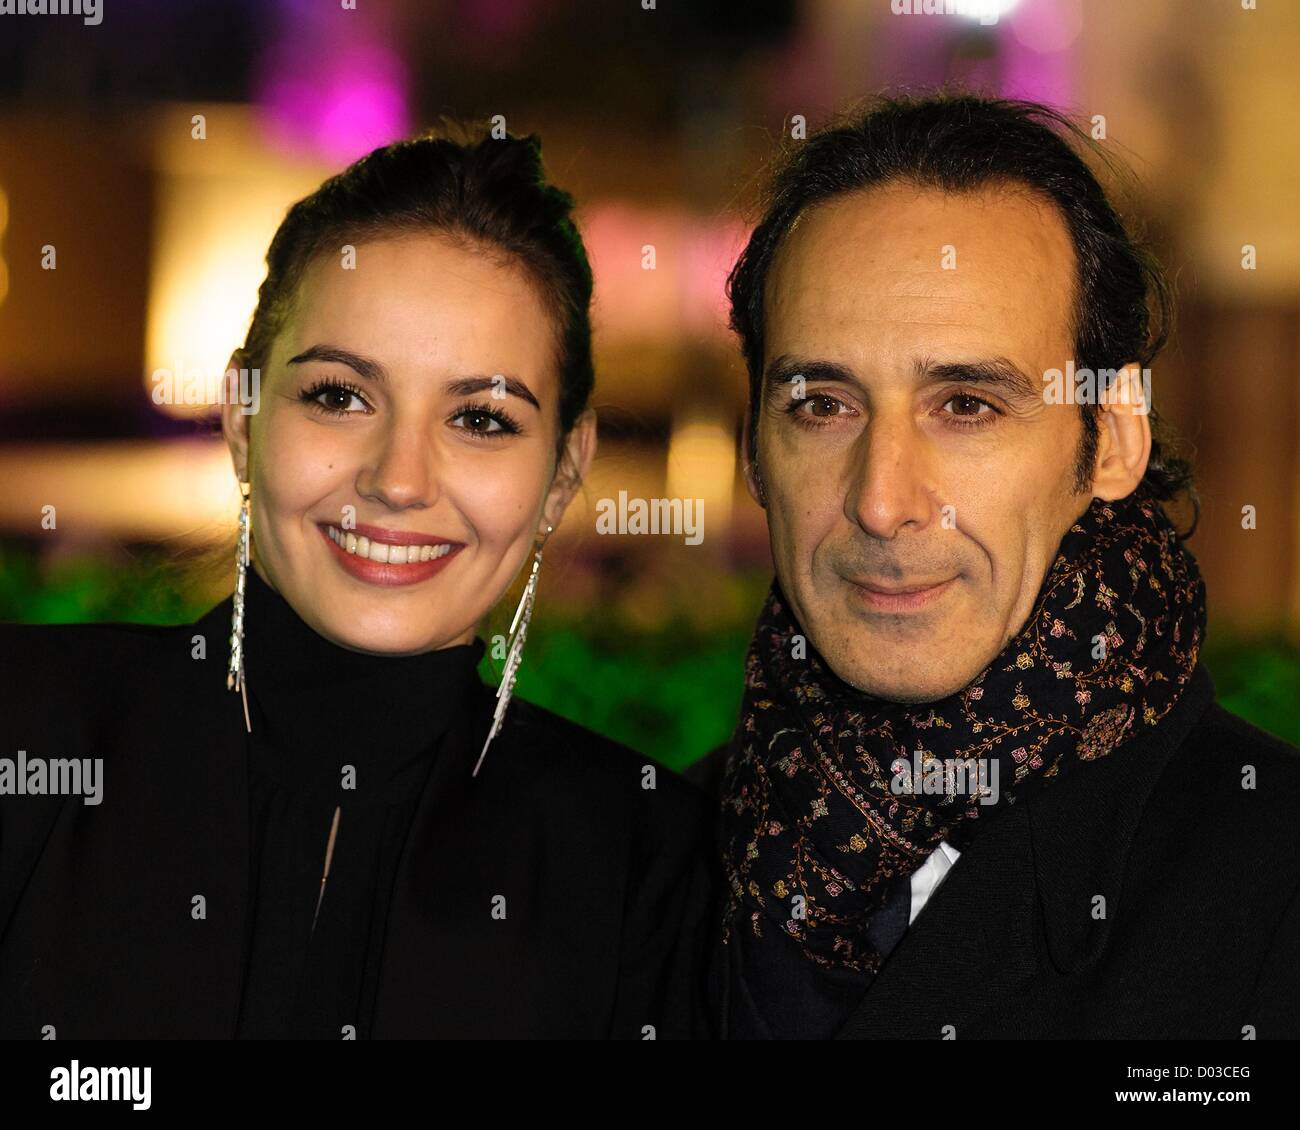 London, UK. 15th November 2012. Alexandre Desplat (Composer) with his daughter attends the UK Premiere of Rise of the Guardians on 15/11/2012 at The Empire Leicester Square, London. Persons pictured: Alexandre Desplat (Composer). Picture by Julie Edwards/ Alamy Live News Stock Photo